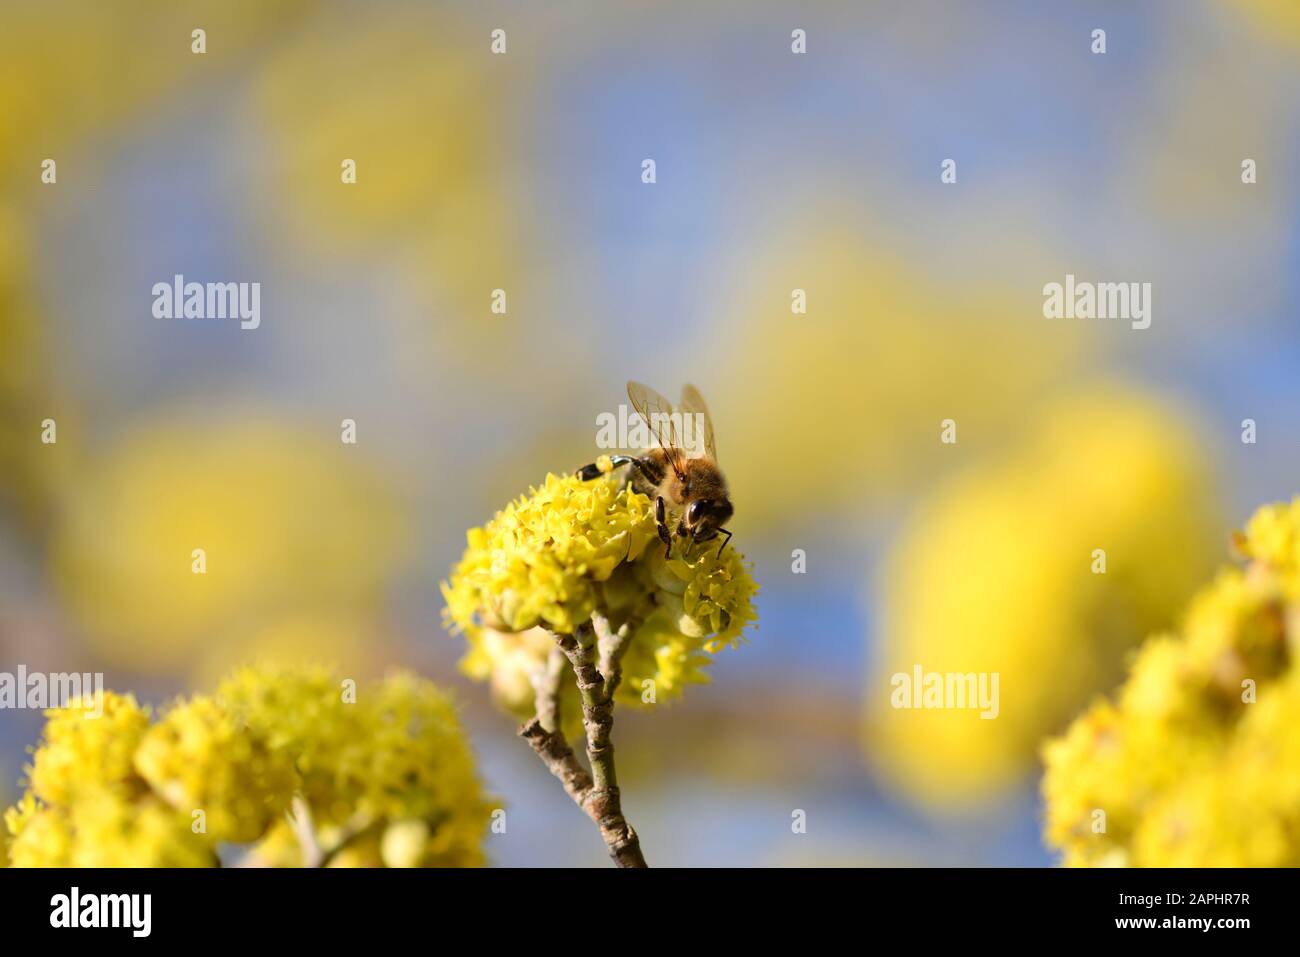 Flowering dogwoods (Cornus mas) pollinated by bees in the spring against the clear blue sky Stock Photo